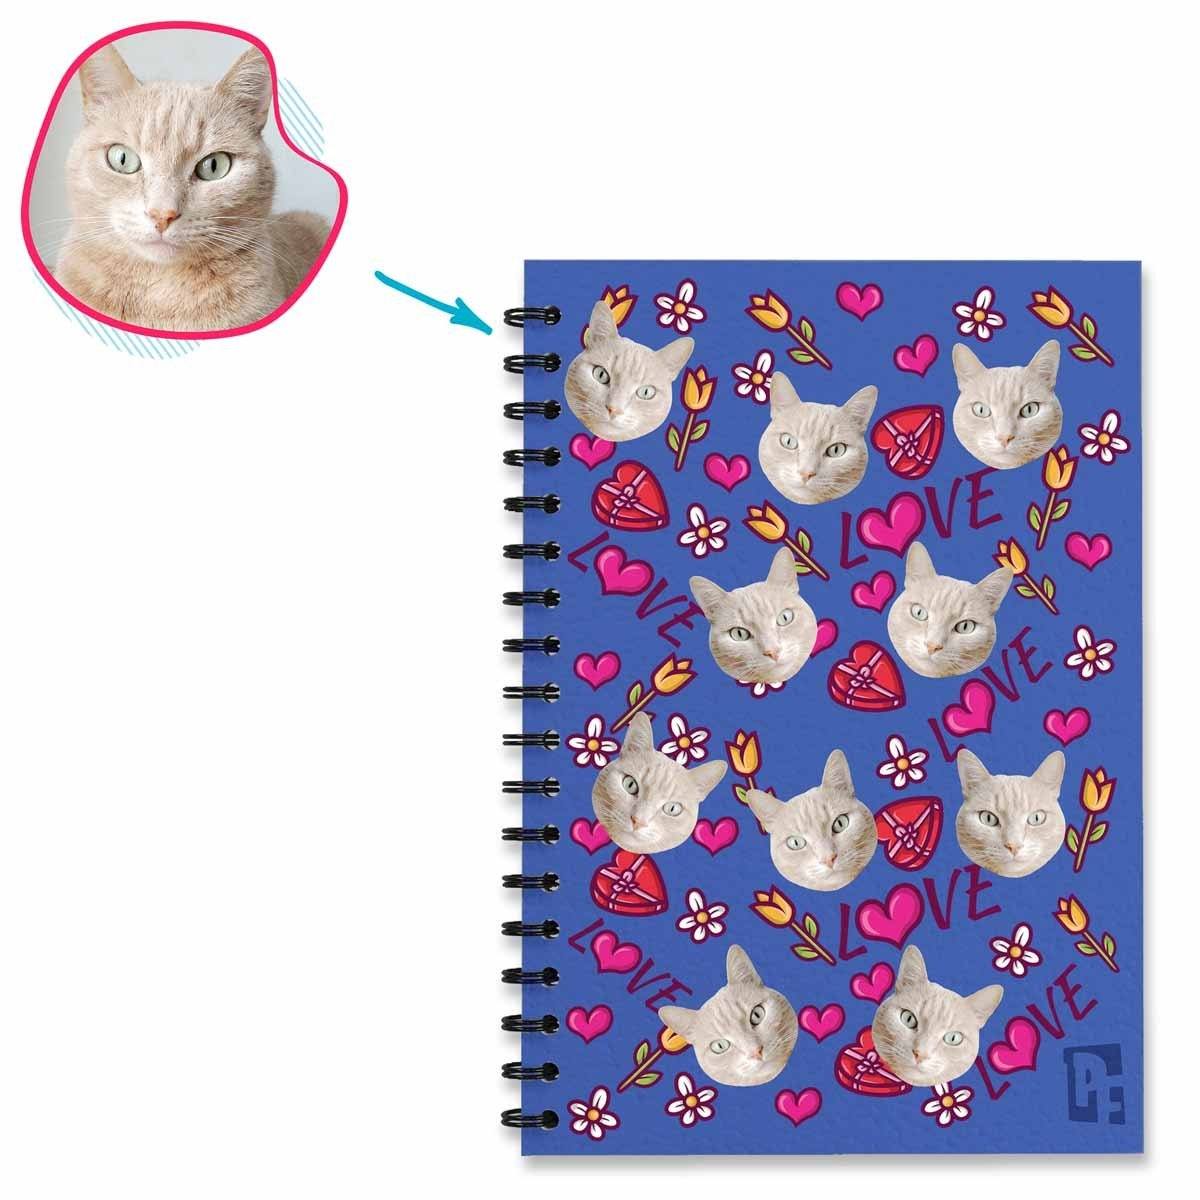 darkblue Hearts and Flowers Notebook personalized with photo of face printed on them